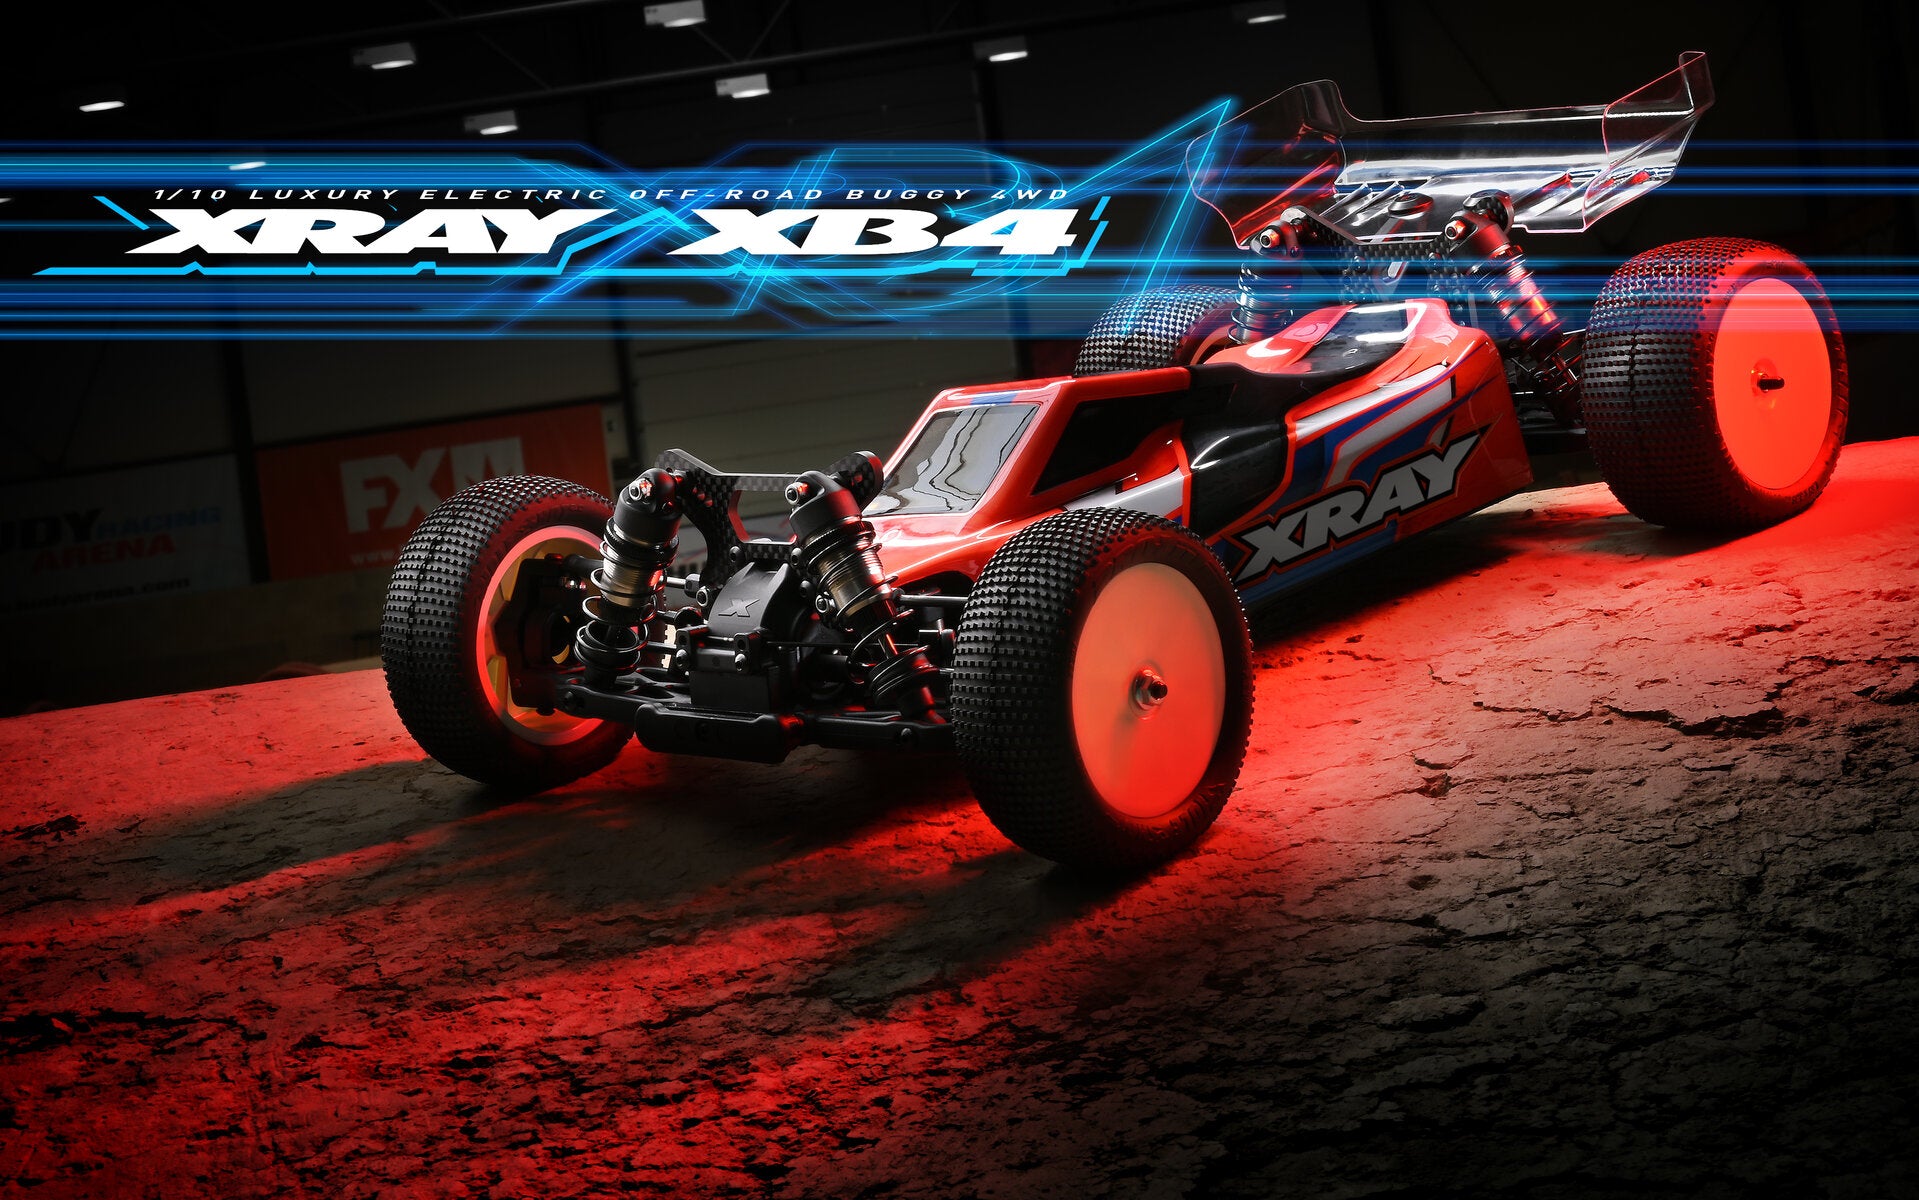 XRAY: XB4D'24 - 4WD 1/10 ELECTRIC OFF-ROAD CAR - DIRT EDITION